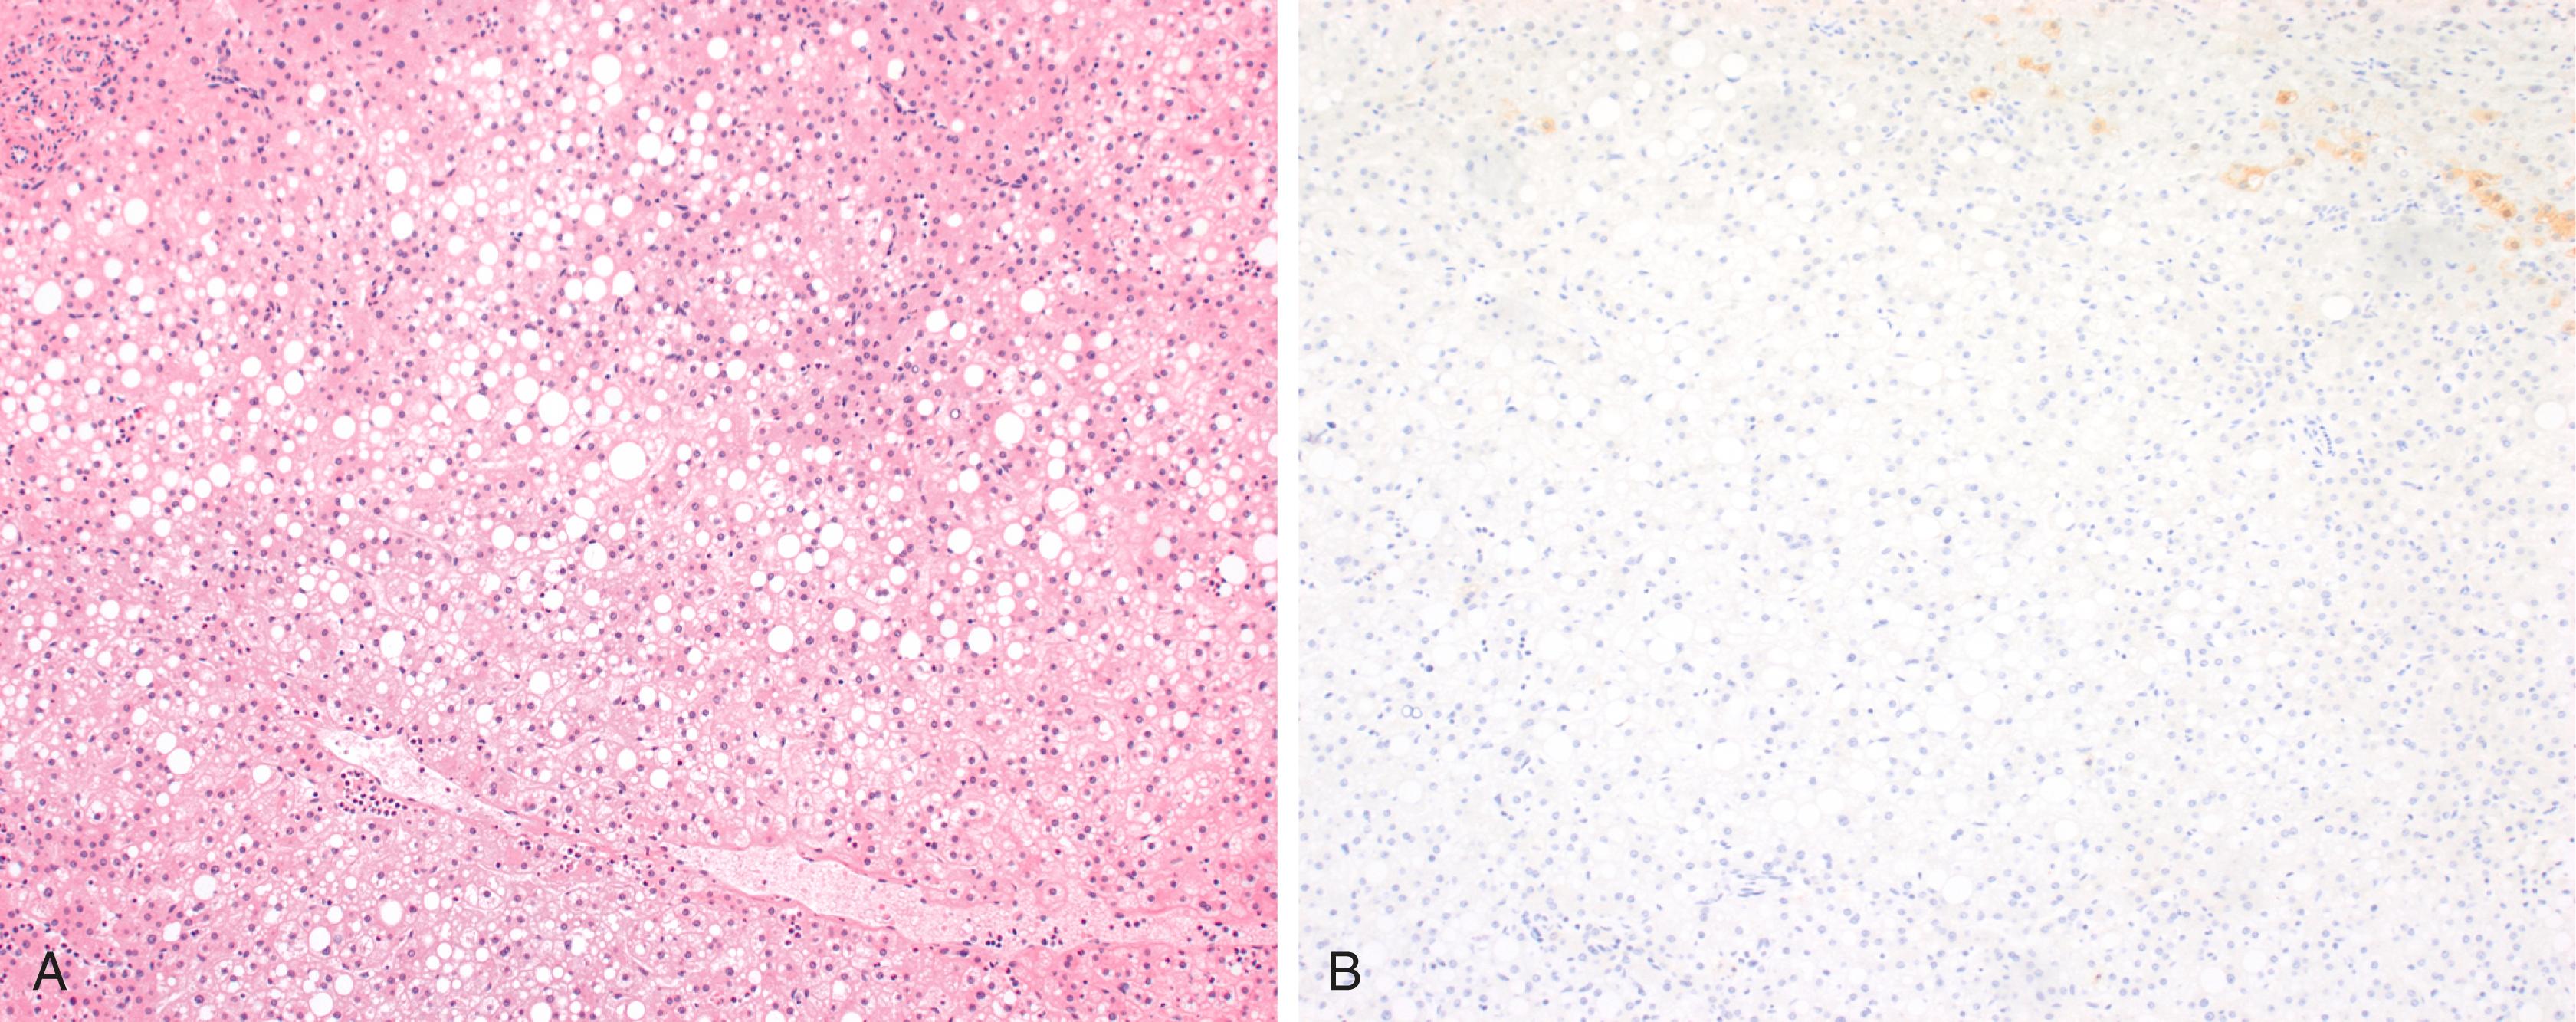 FIGURE 56.3, HNF1α –inactivated HCA (H-HCA) characterized by prominent intralesional steatosis.